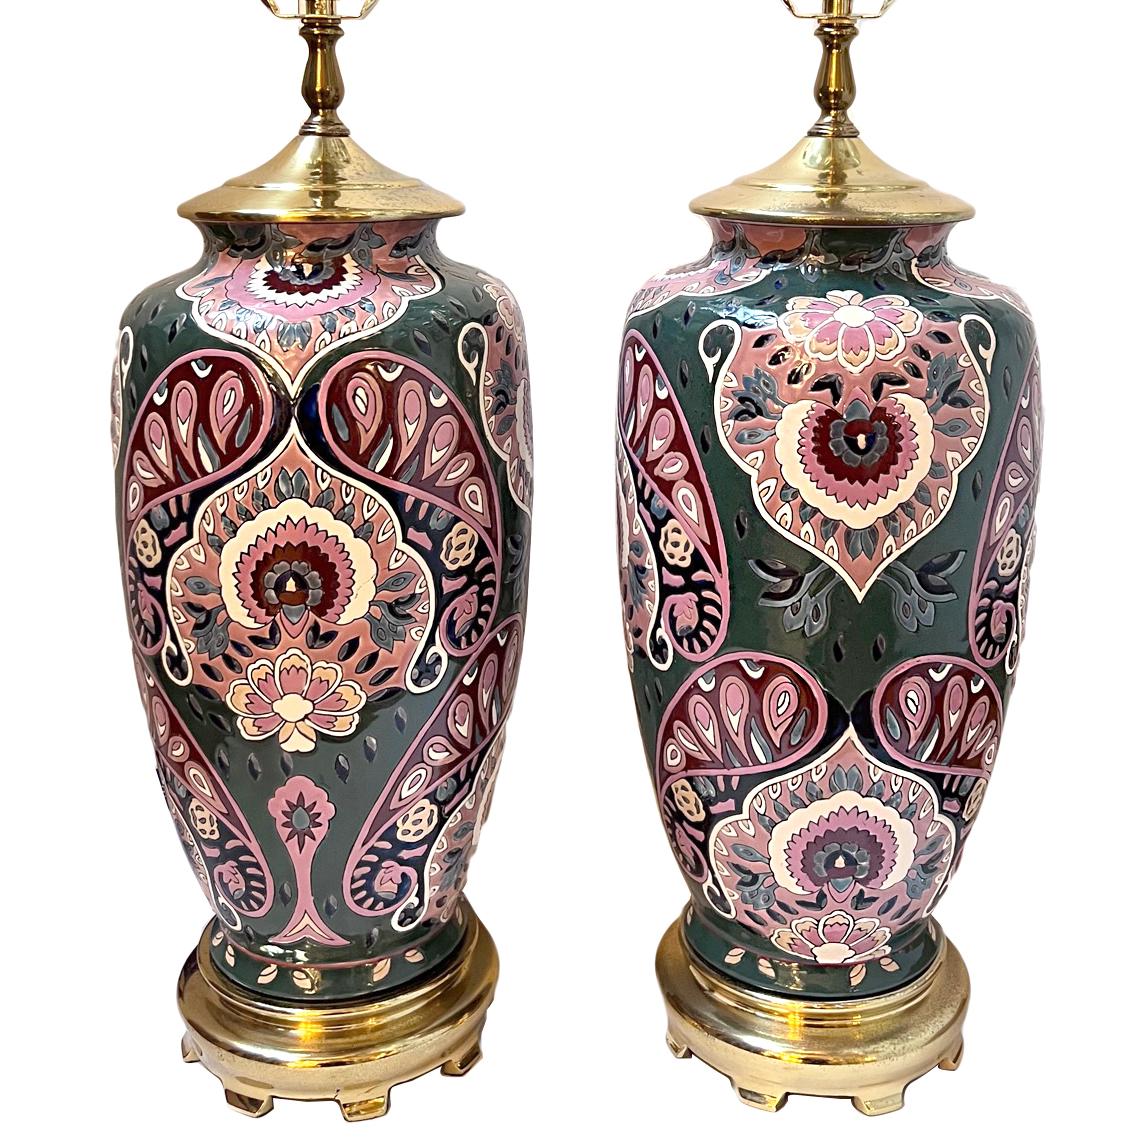 Pair of circa 1960's French paisley porcelain lamps.

Measurements:
Height of body: 19.5